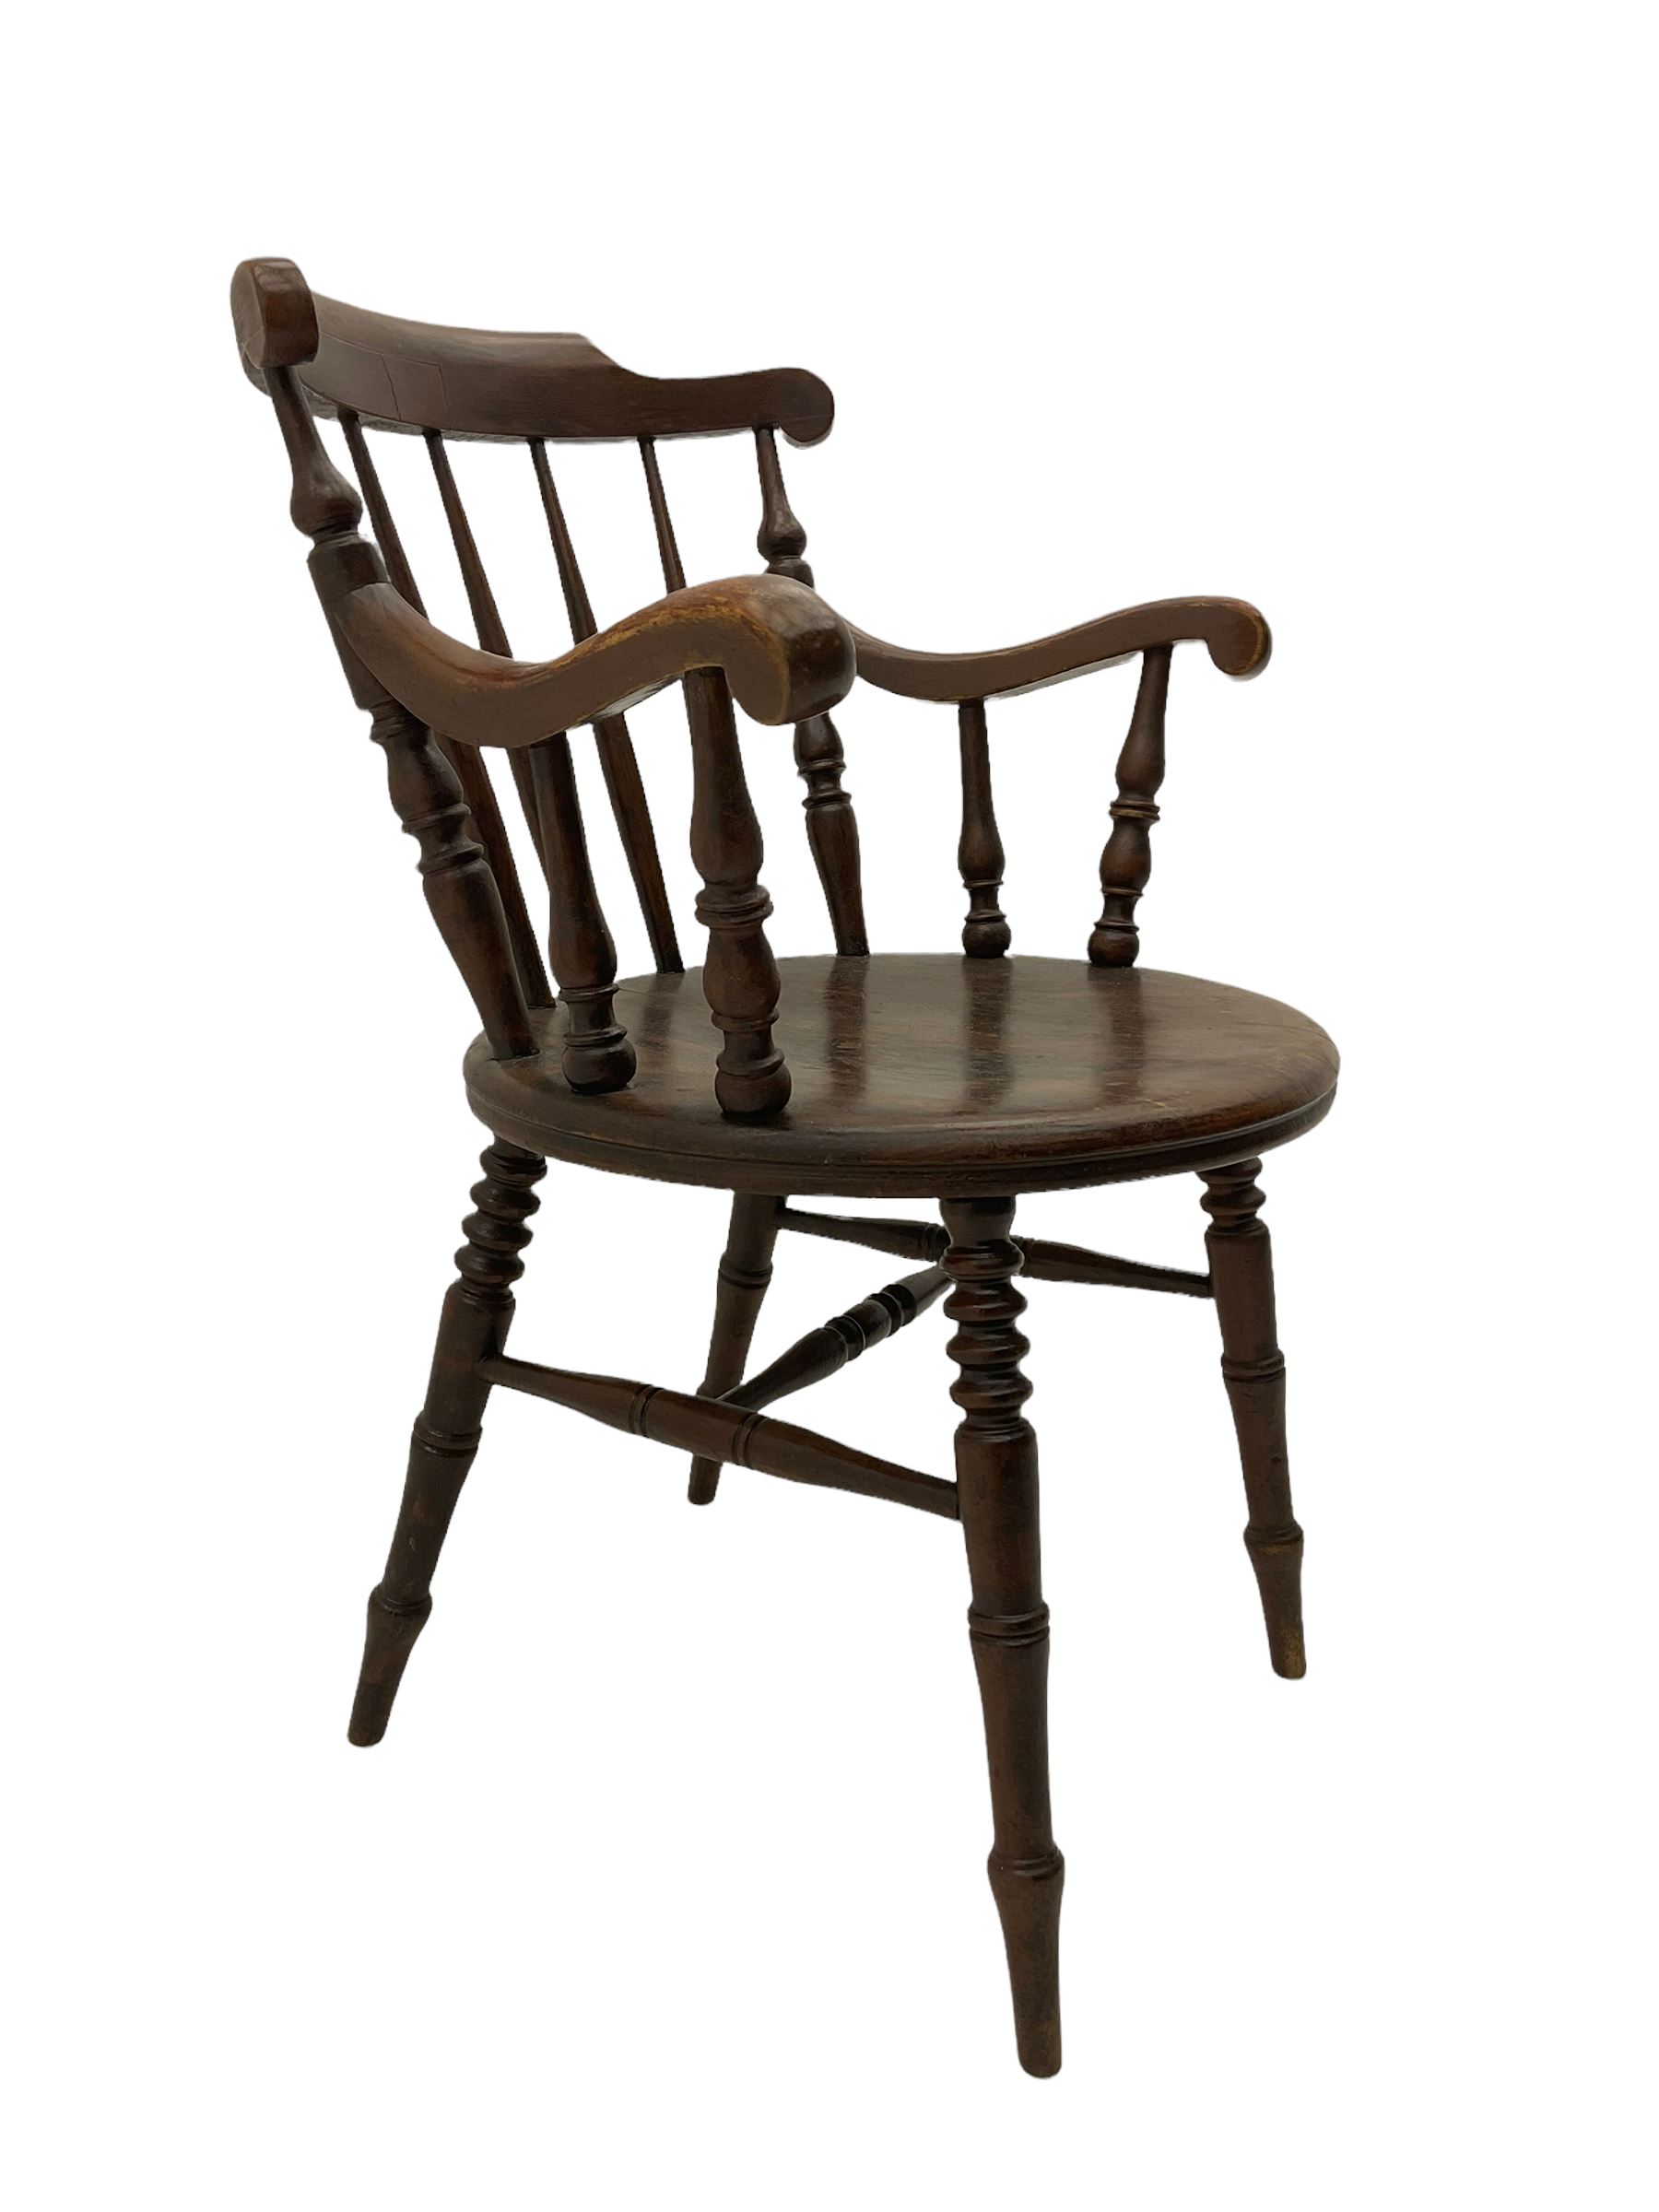 Late 19th century stained beech 'Penny' chair with "Ibex" label underneath - Image 3 of 7